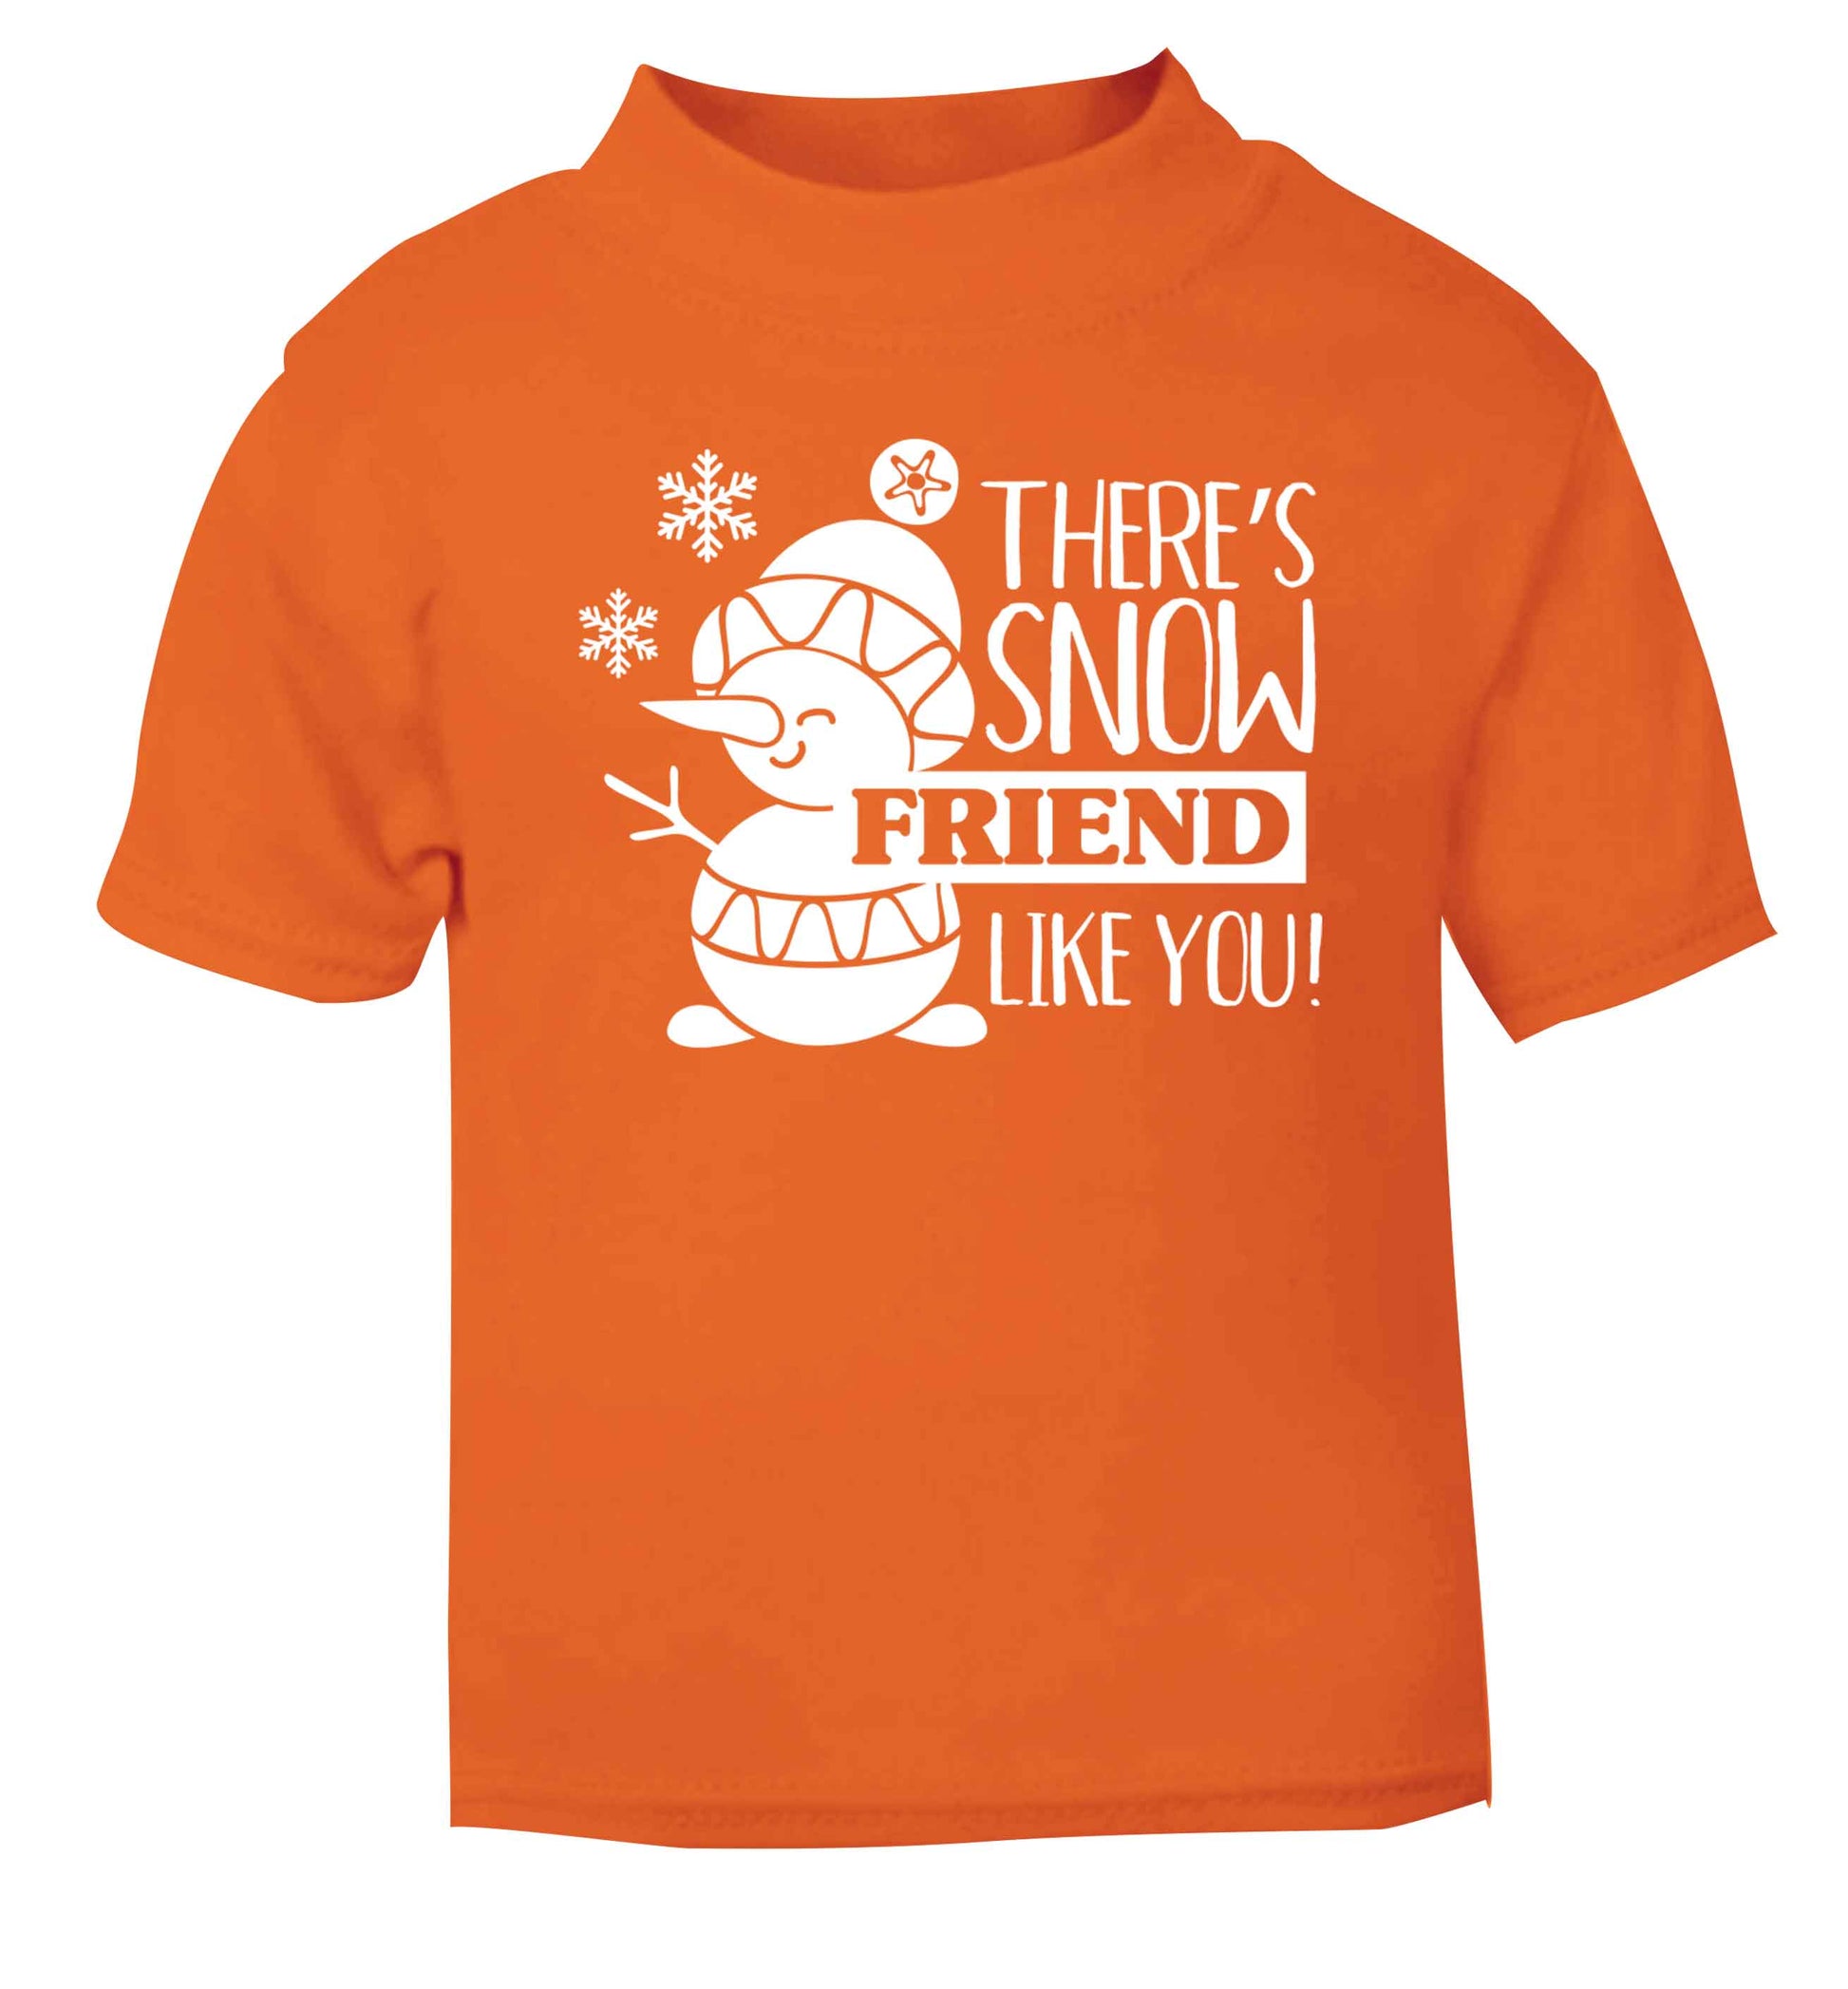 There's snow friend like you orange baby toddler Tshirt 2 Years